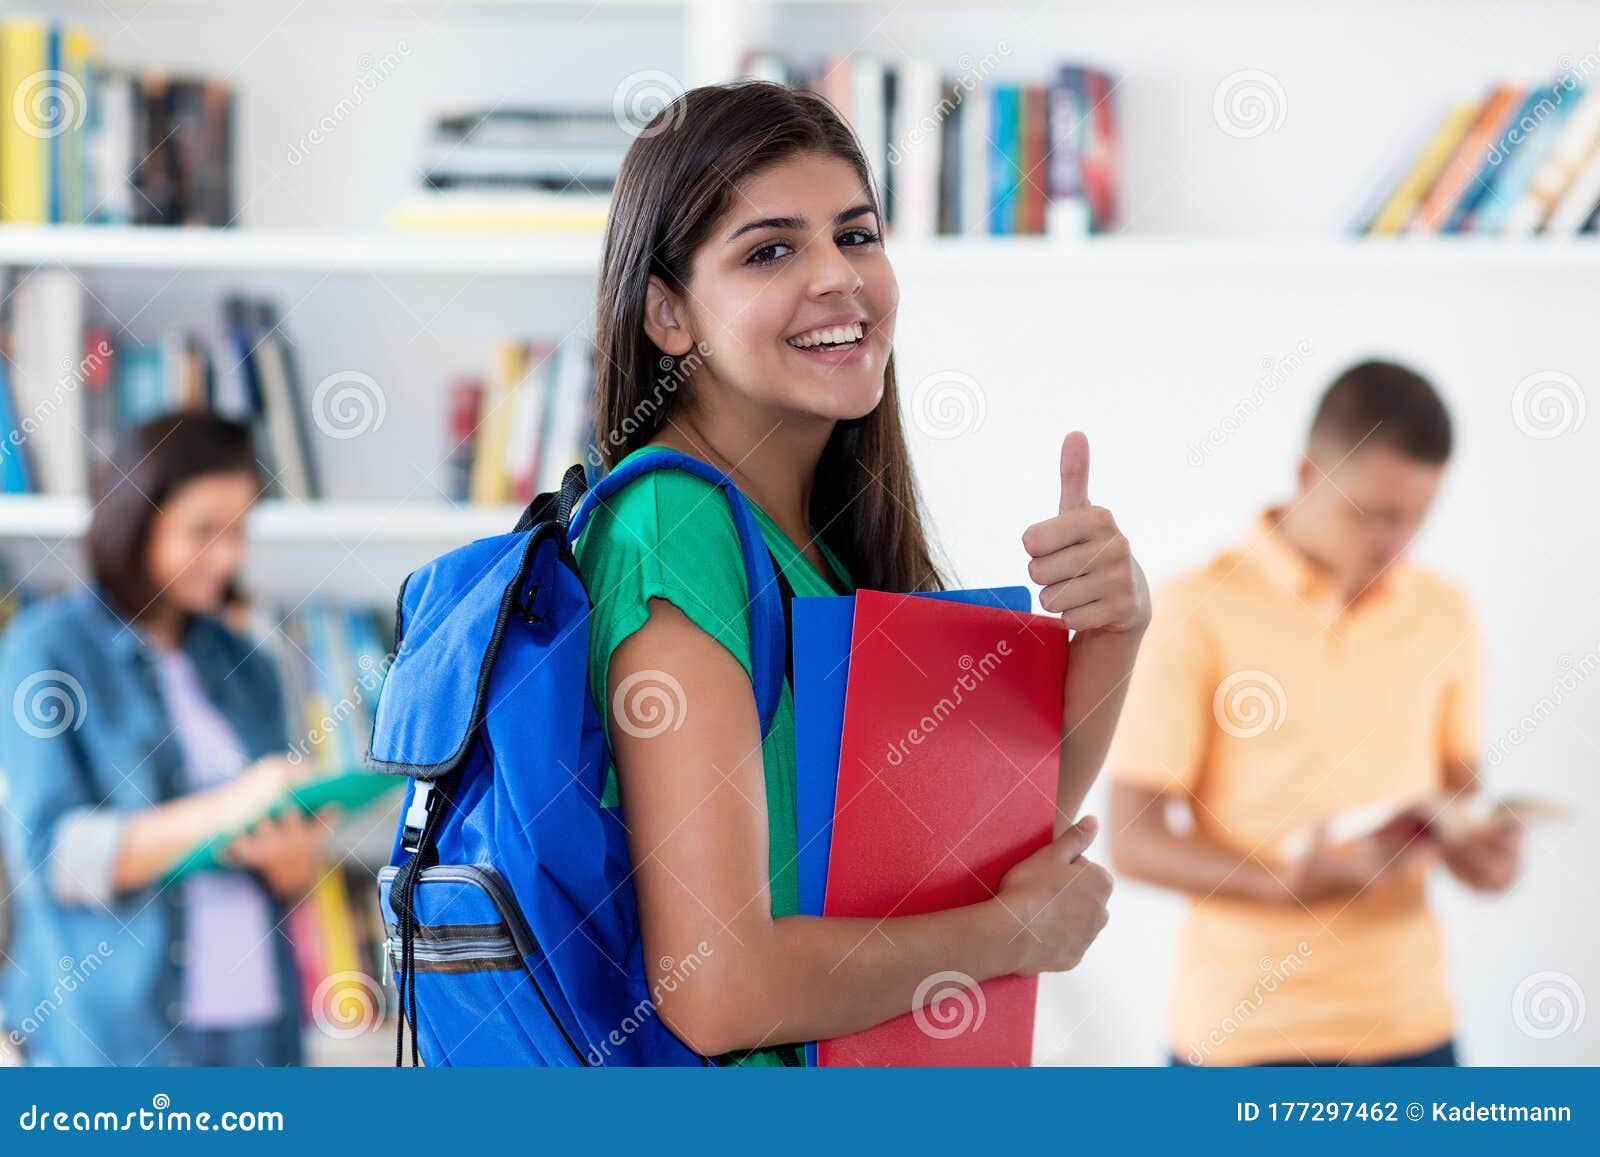 Hispanic Female Student Happy About Successful Graduation And Degree